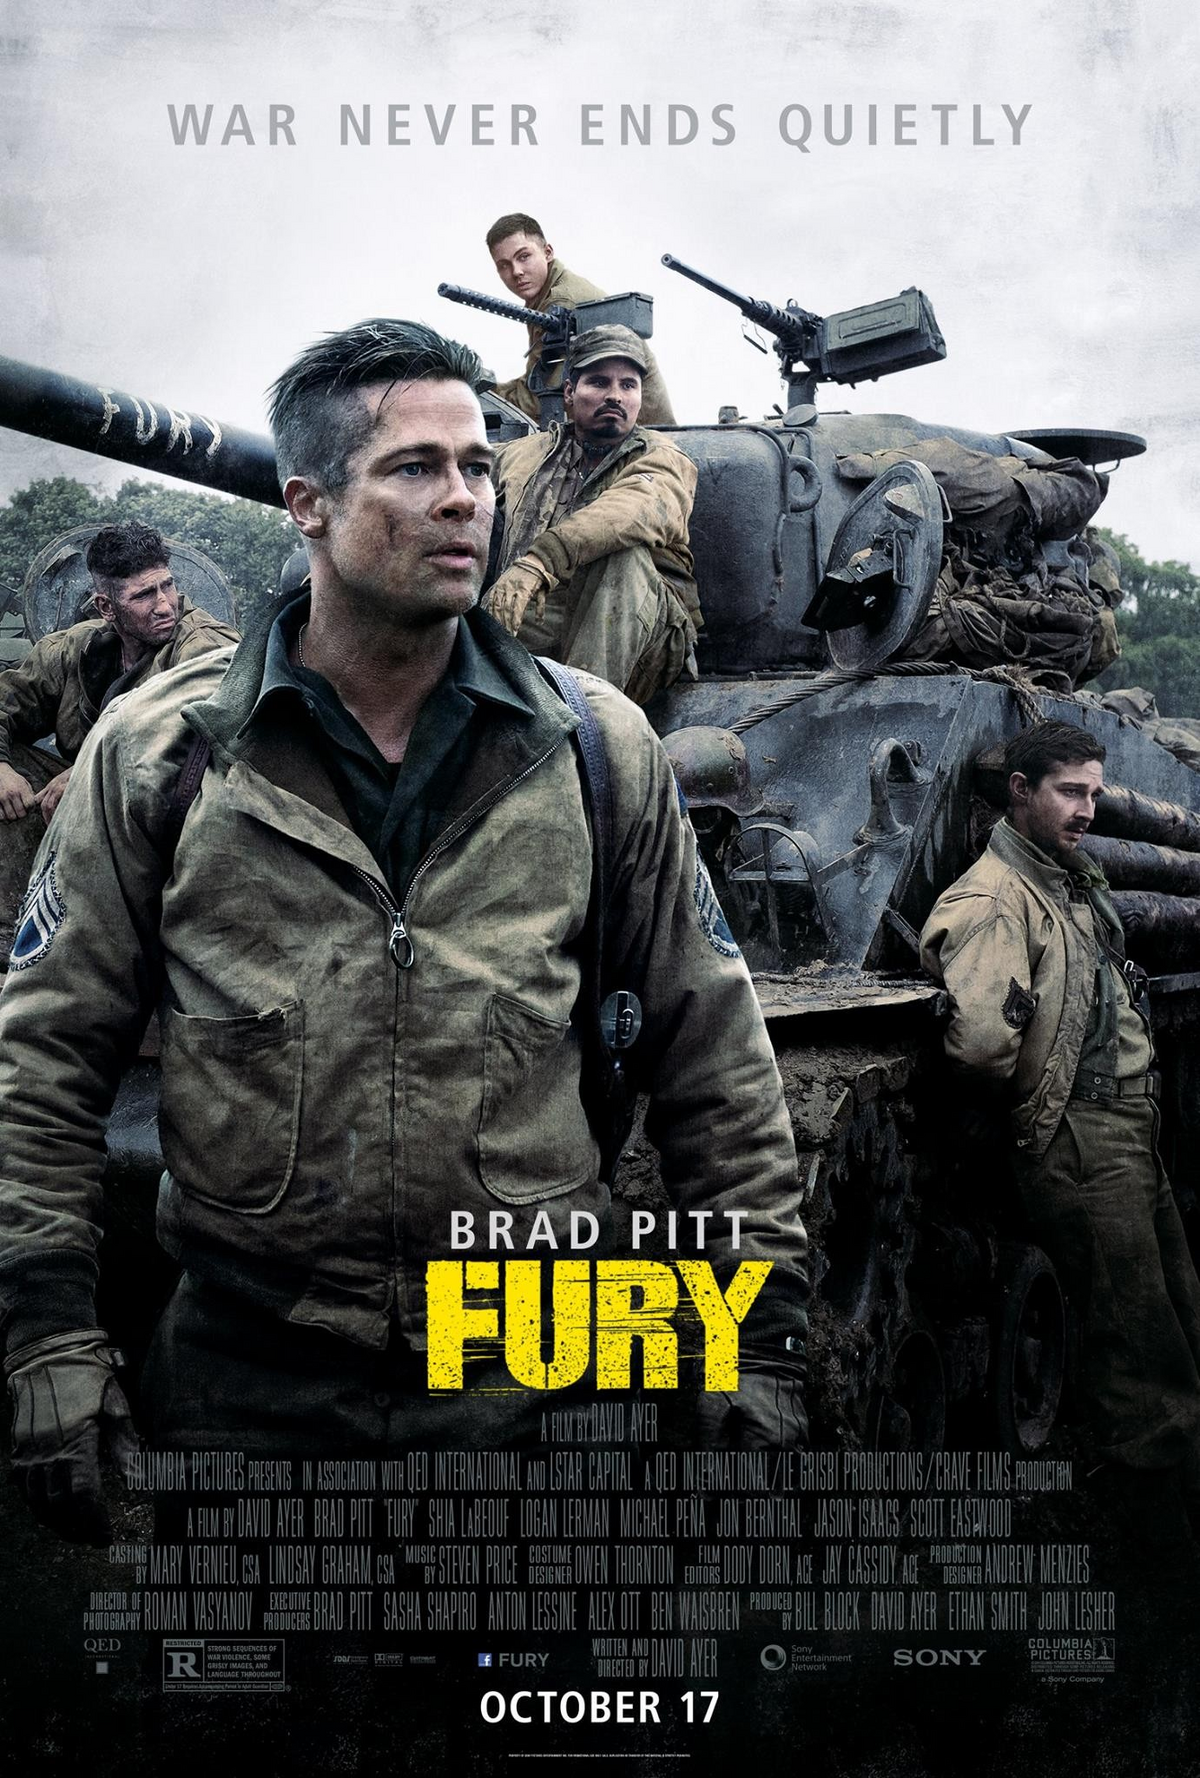 https://static.wikia.nocookie.net/furymovie/images/8/86/Fury_Theatrical_Poster.png/revision/latest/scale-to-width-down/1200?cb=20141116150100